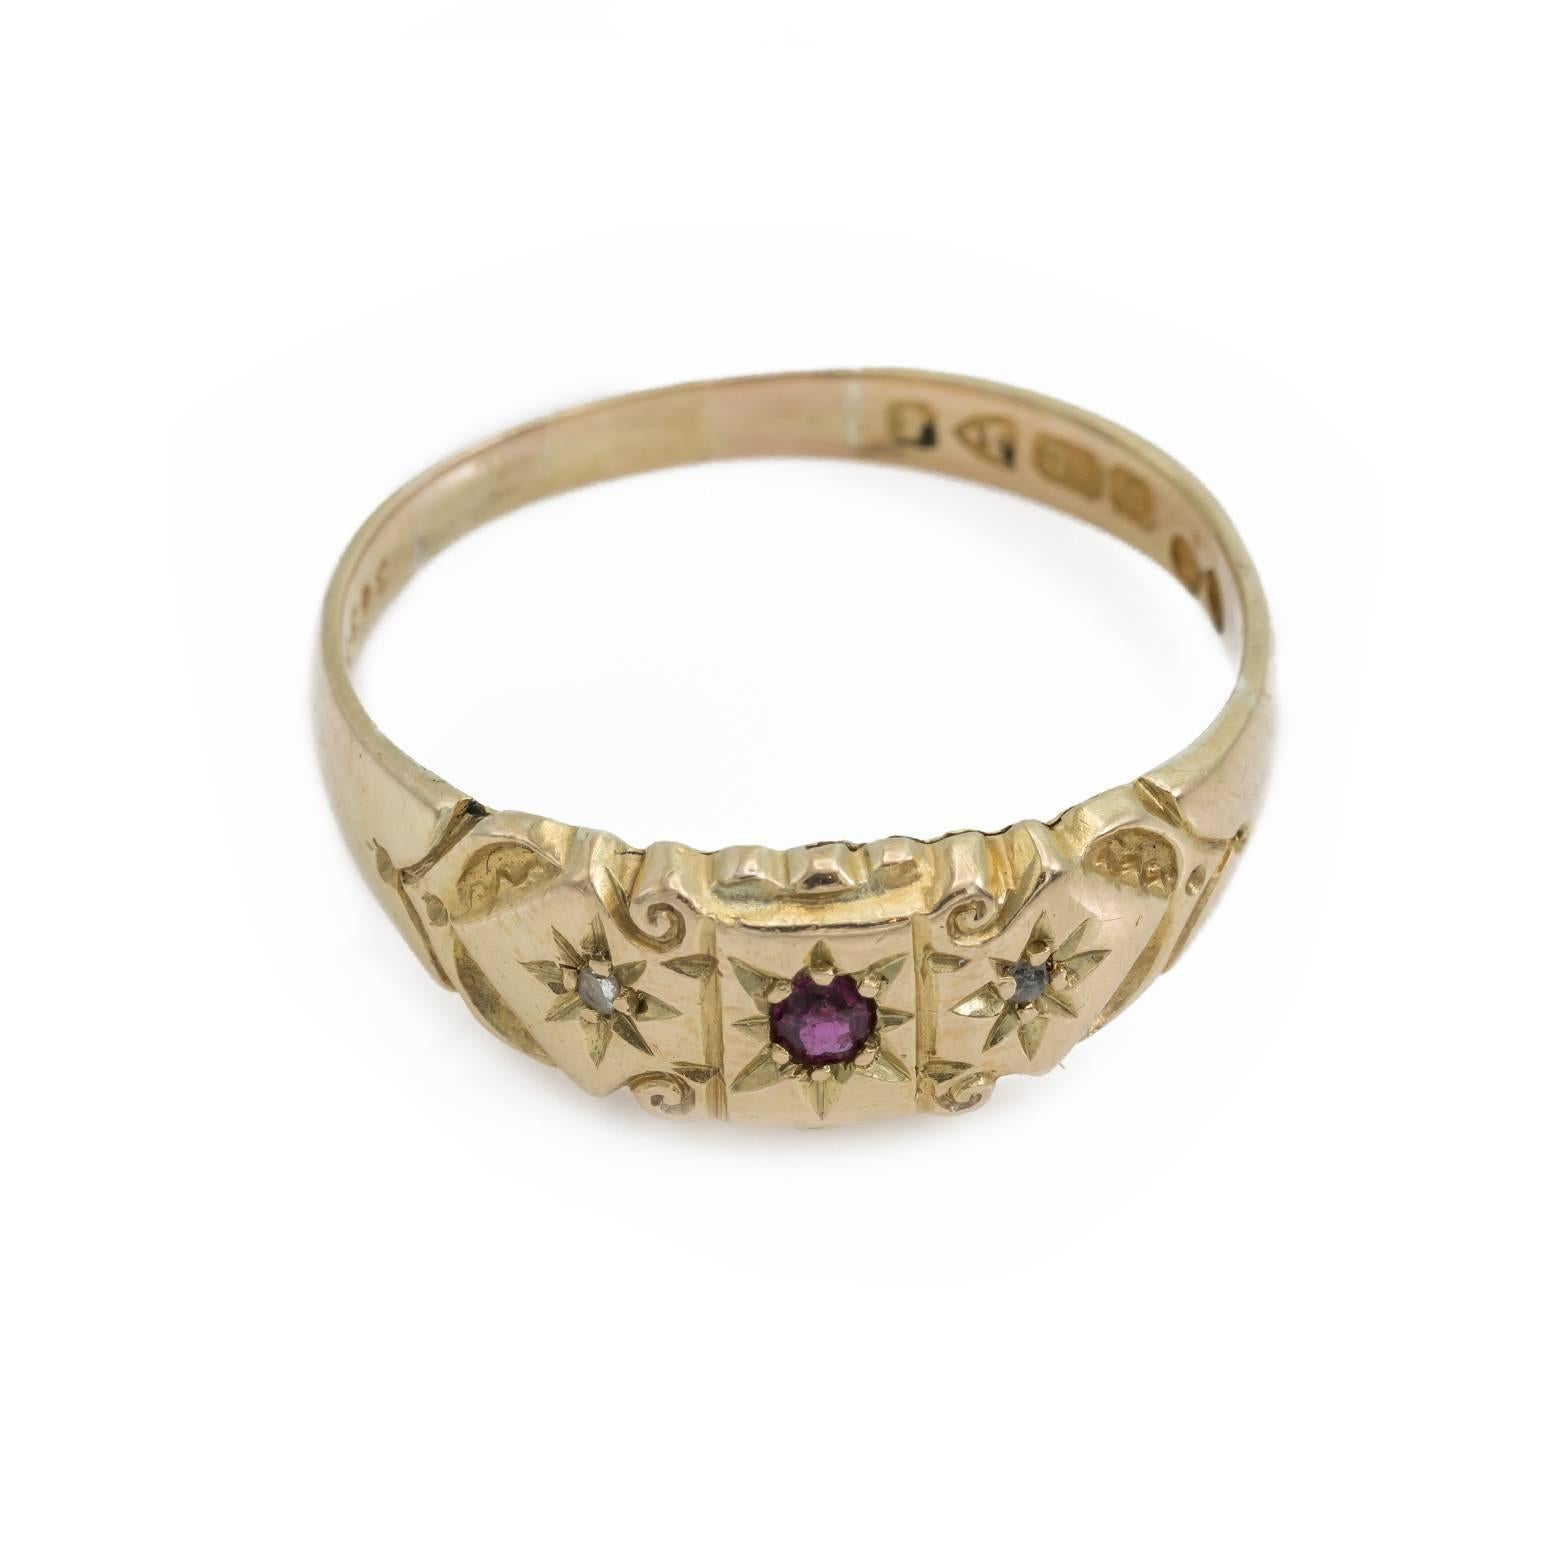 This stunning ruby and diamond band ring was made in 1905 and is in perfect condition. The detail work is engraved with spirals and stars creating a magical and enchanted look to it. Size 10.25 and may be sized 18K Yellow Gold. 